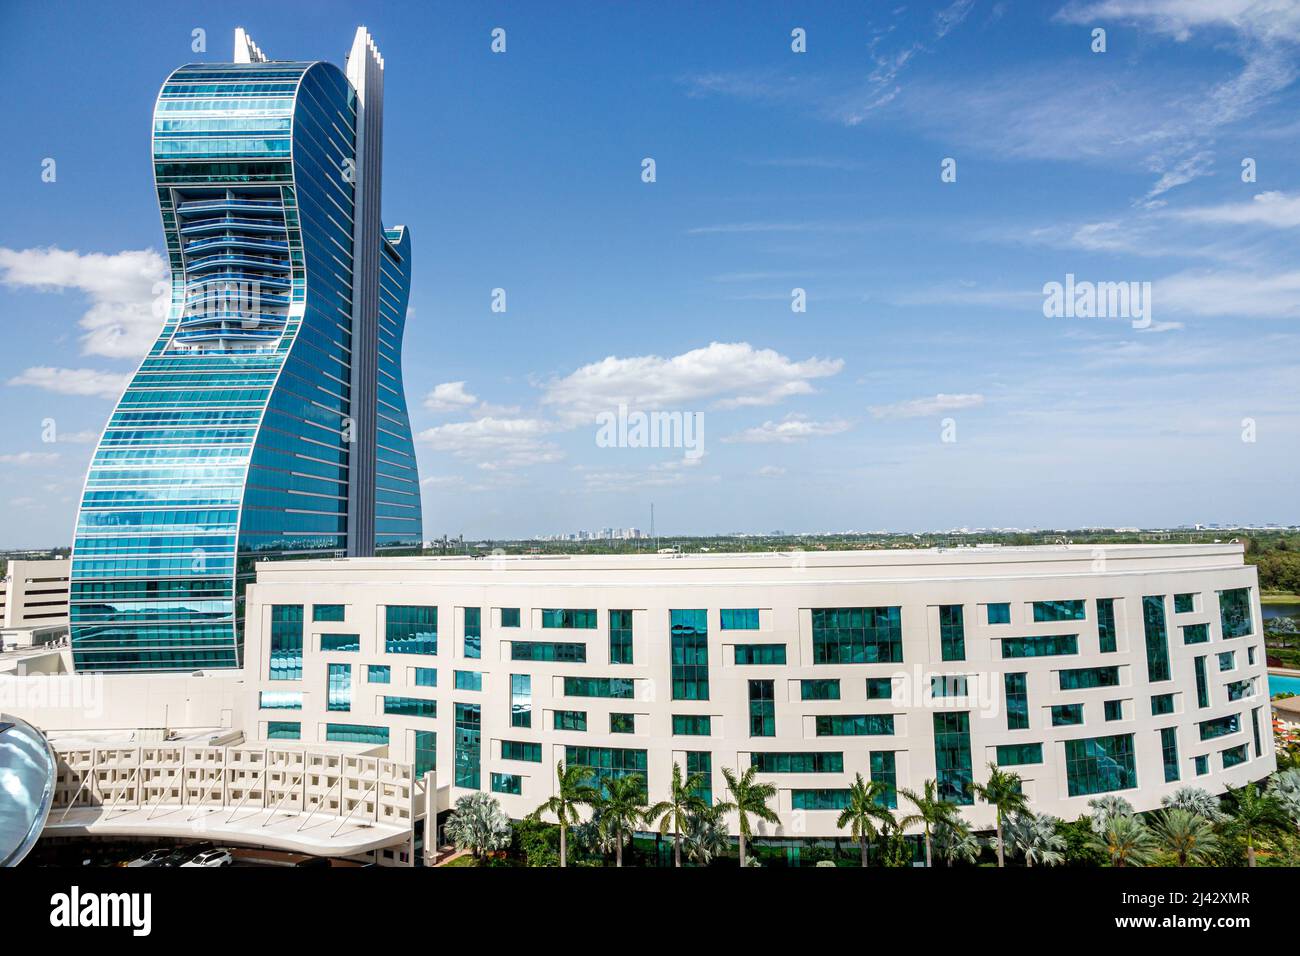 Hollywood Florida Seminole Hard Rock Hotel & Casino tribe tribal reservation giant guitar shaped tower building balconies exterior outside Stock Photo